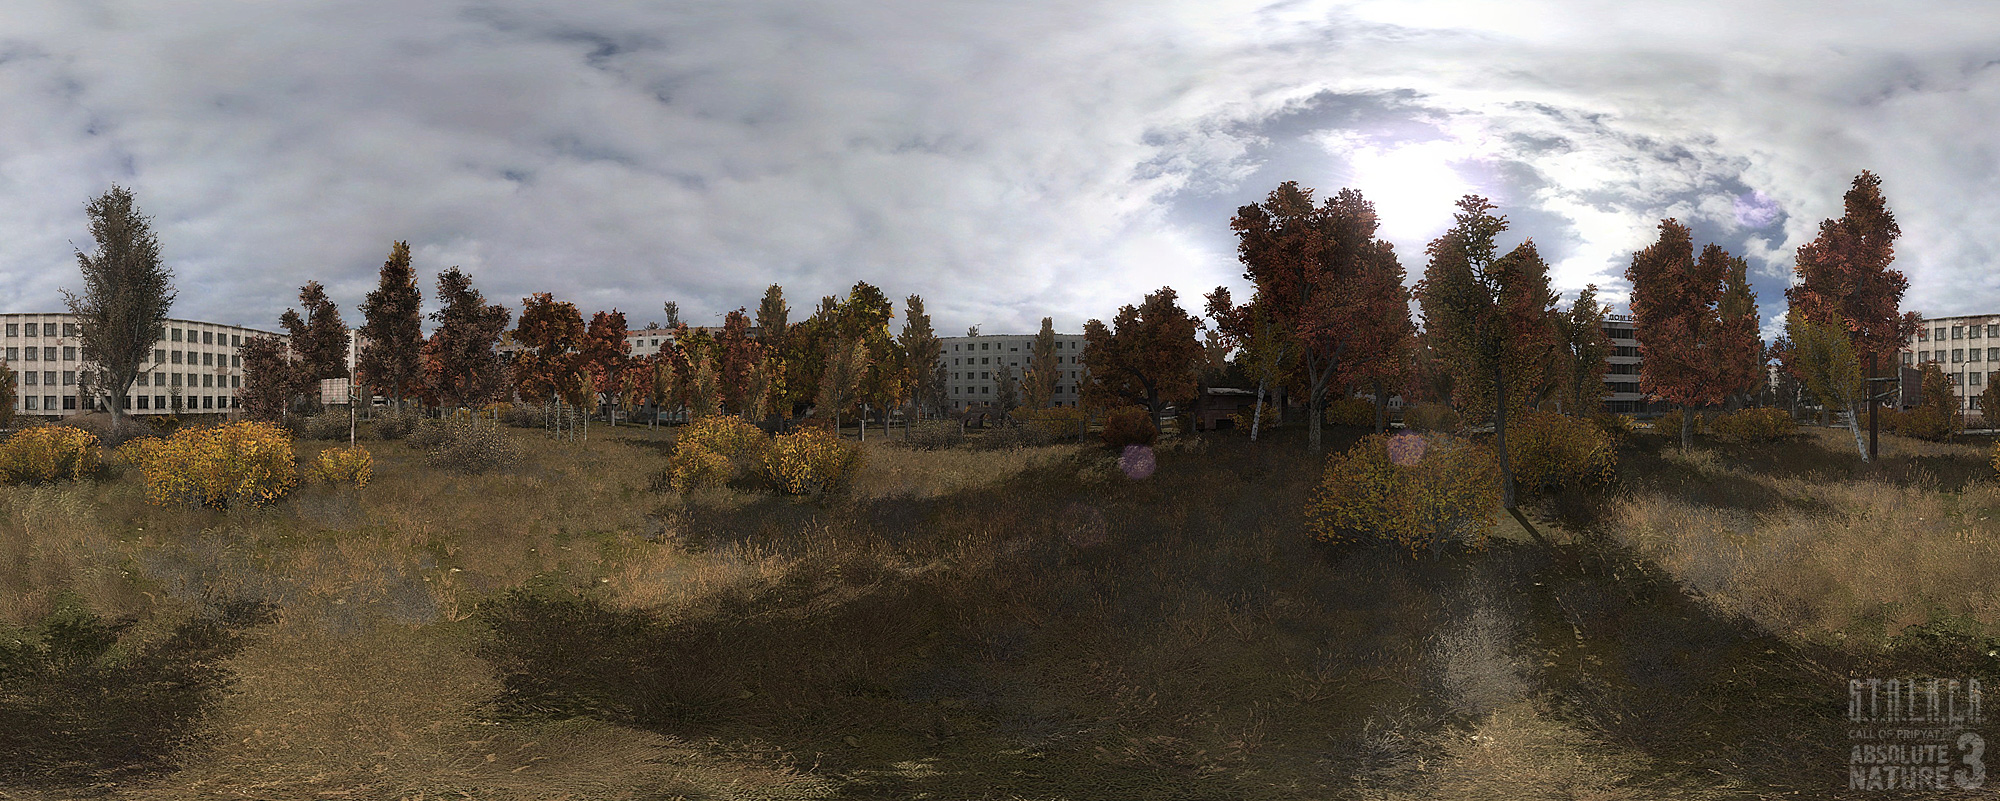 Absolute Nature 3 image - AtmosFear for of Pripyat mod S.T.A.L.K.E.R.: Call of Pripyat - Mod